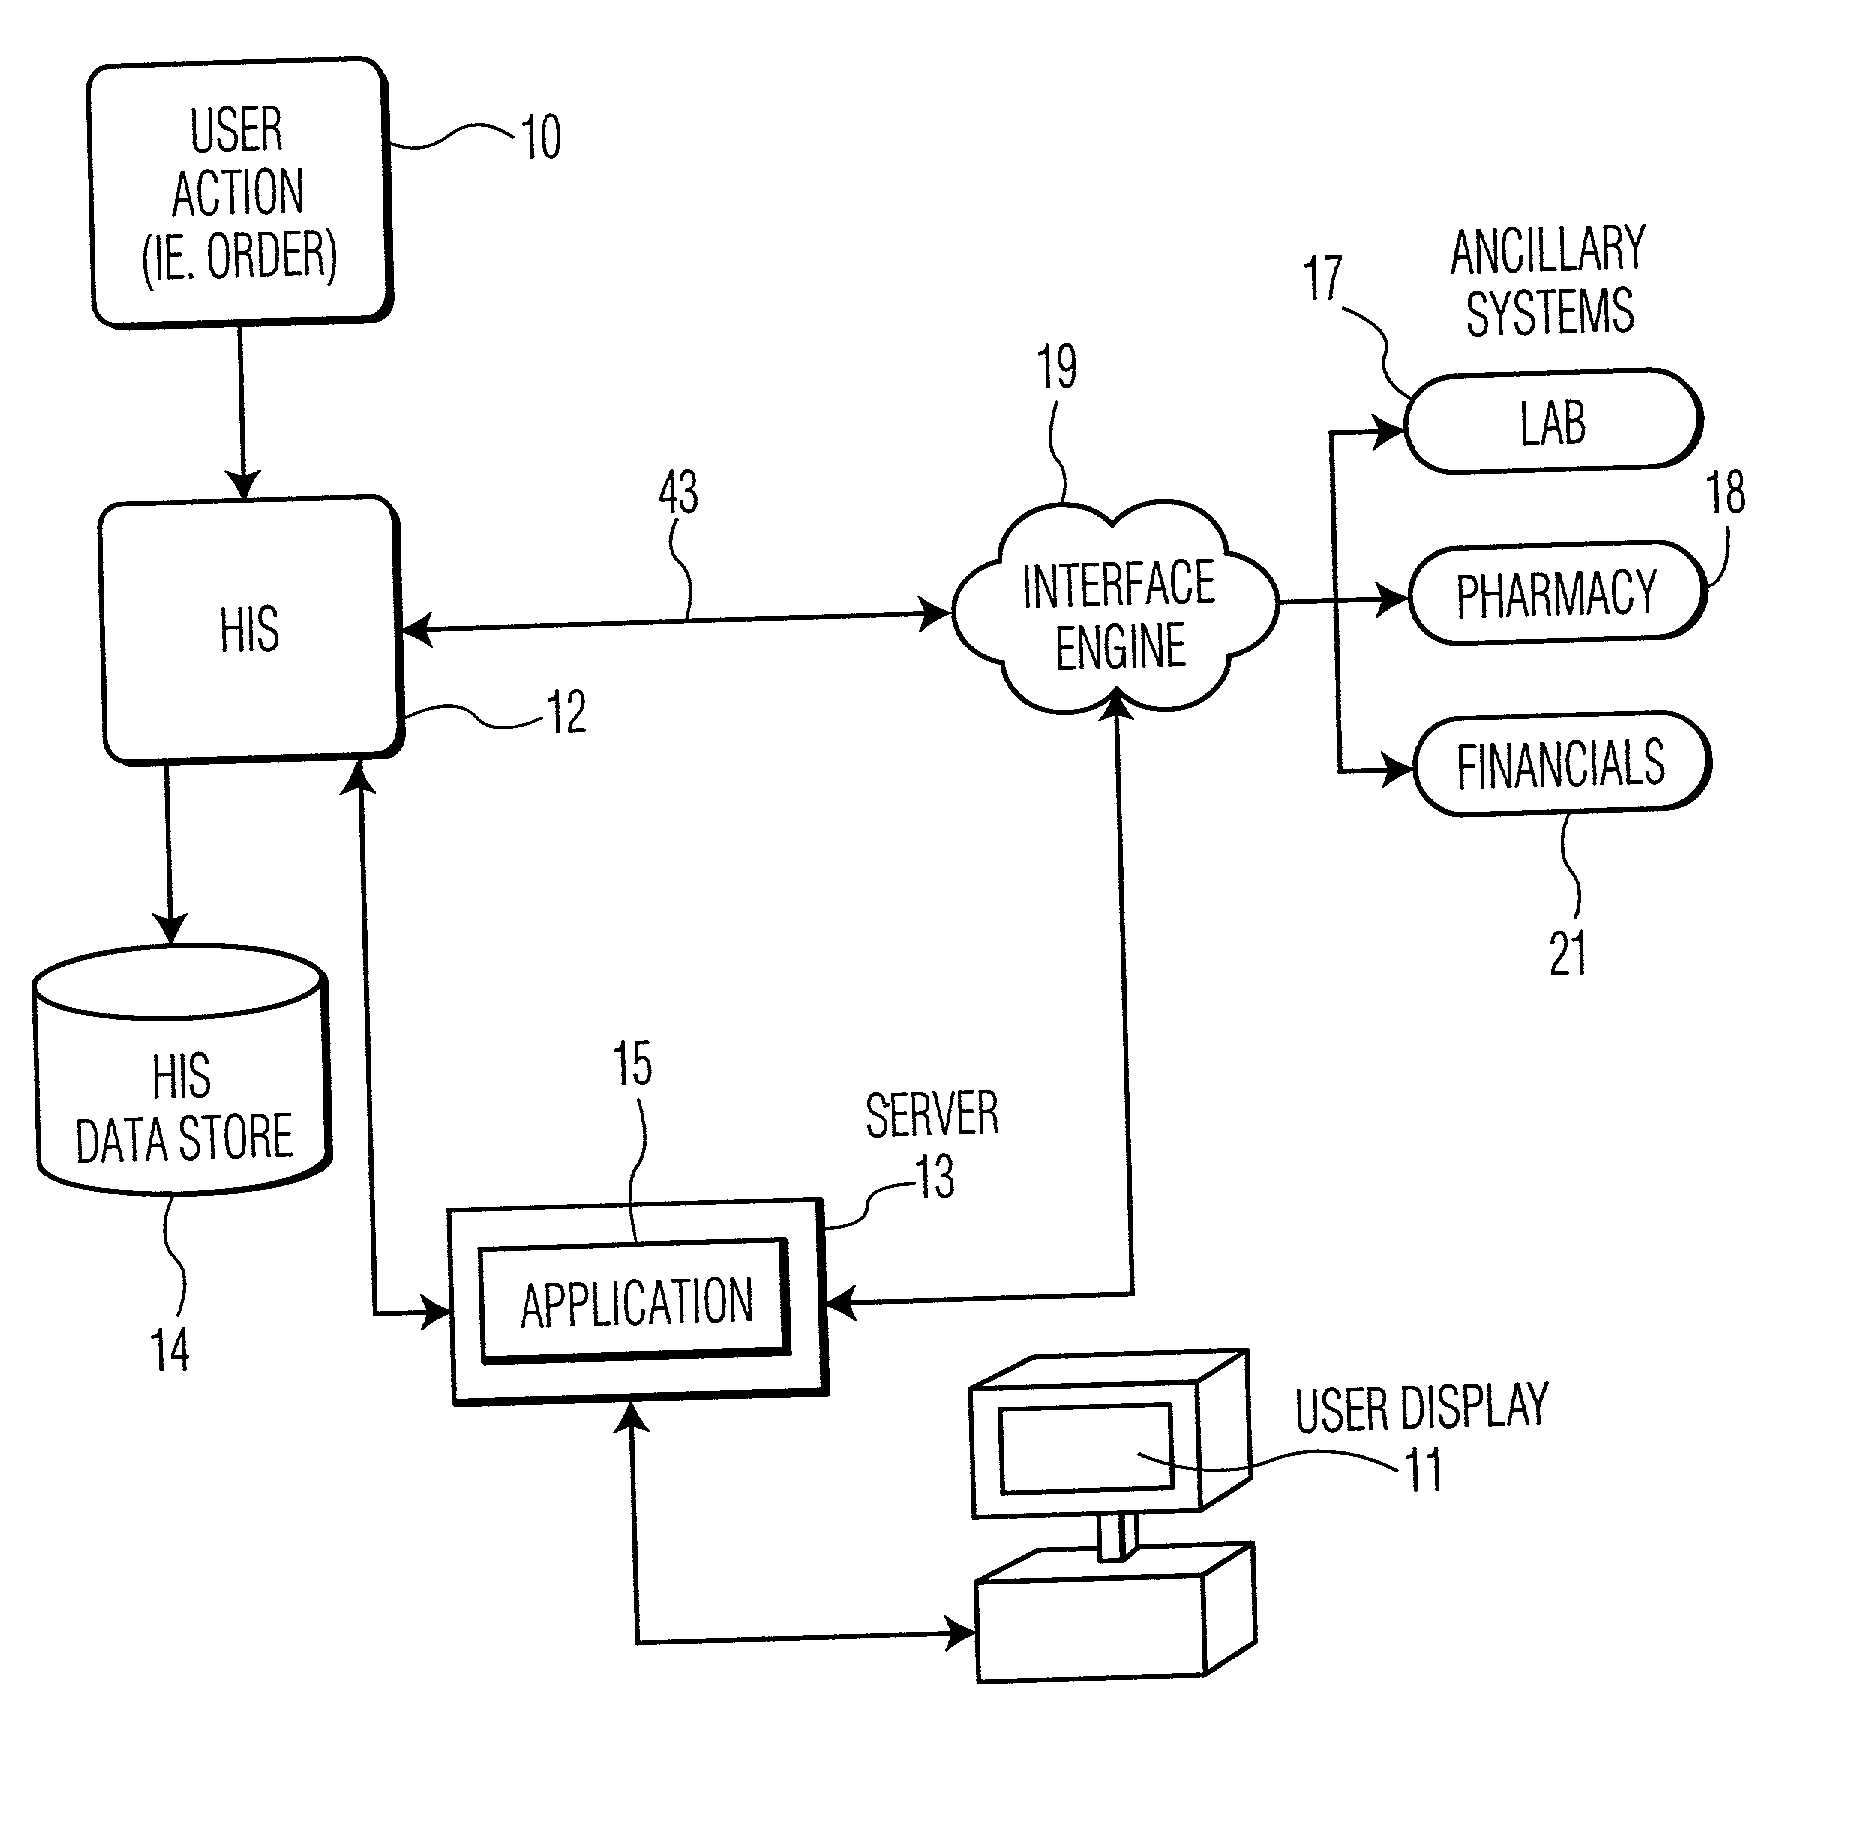 Resource monitoring and user interface system for processing location related information in a healthcare enterprise